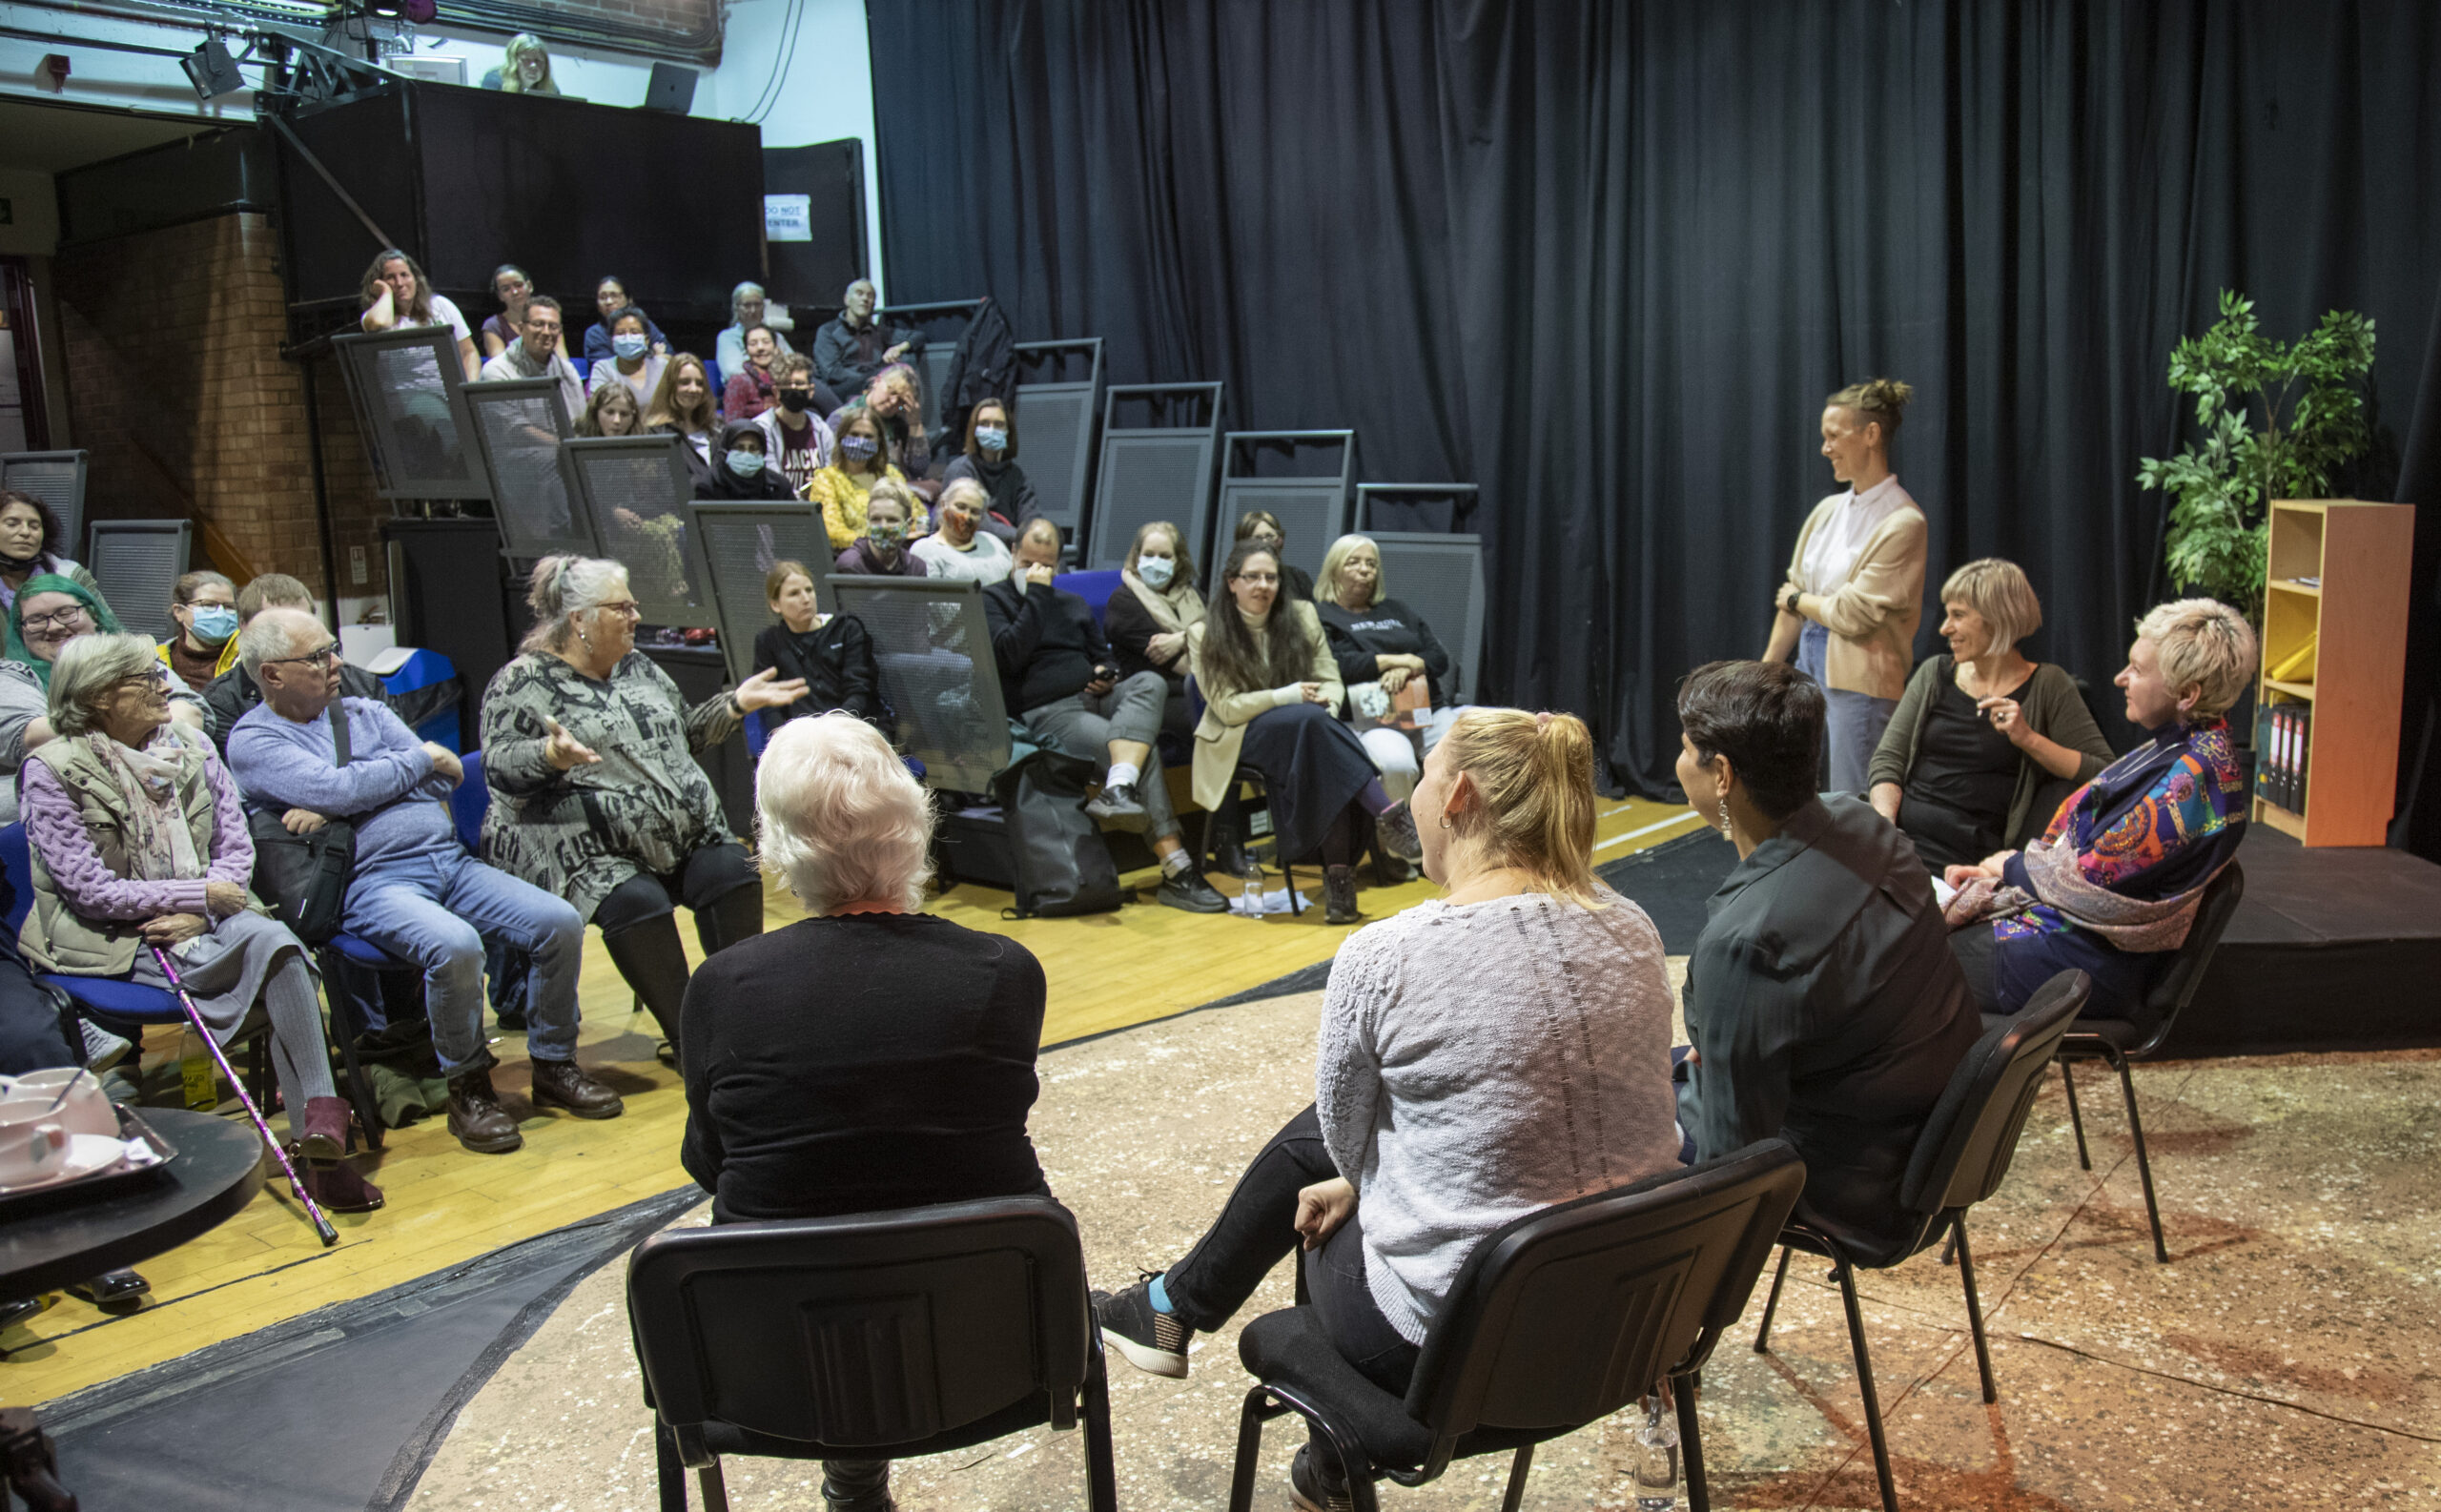 A panel of people sit on stage after a performance and answer questions from the audience